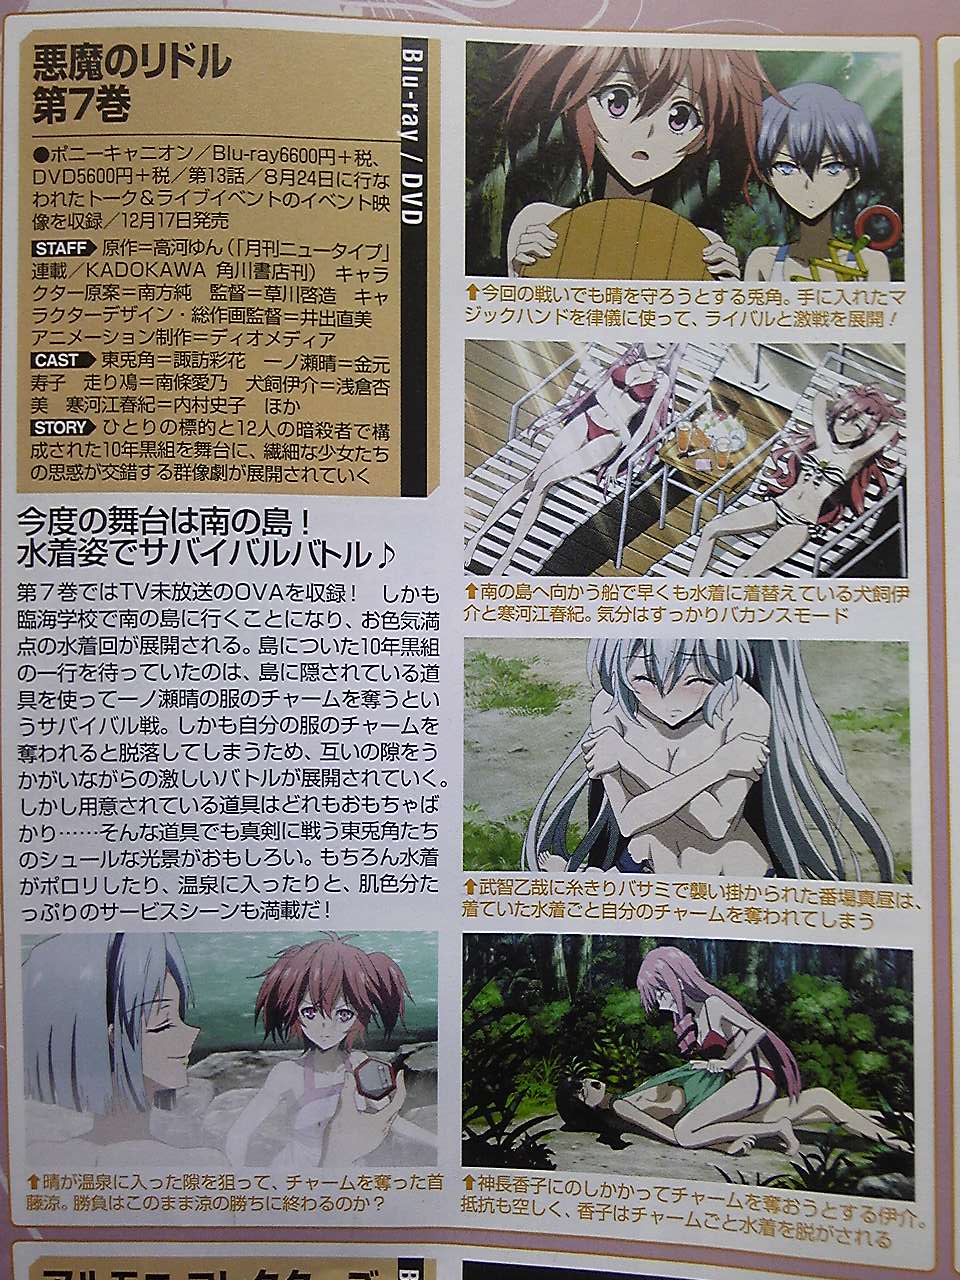 Akuma No Riddle Episode 13 Features Clothes Ripping Yuri Action Haruhichan